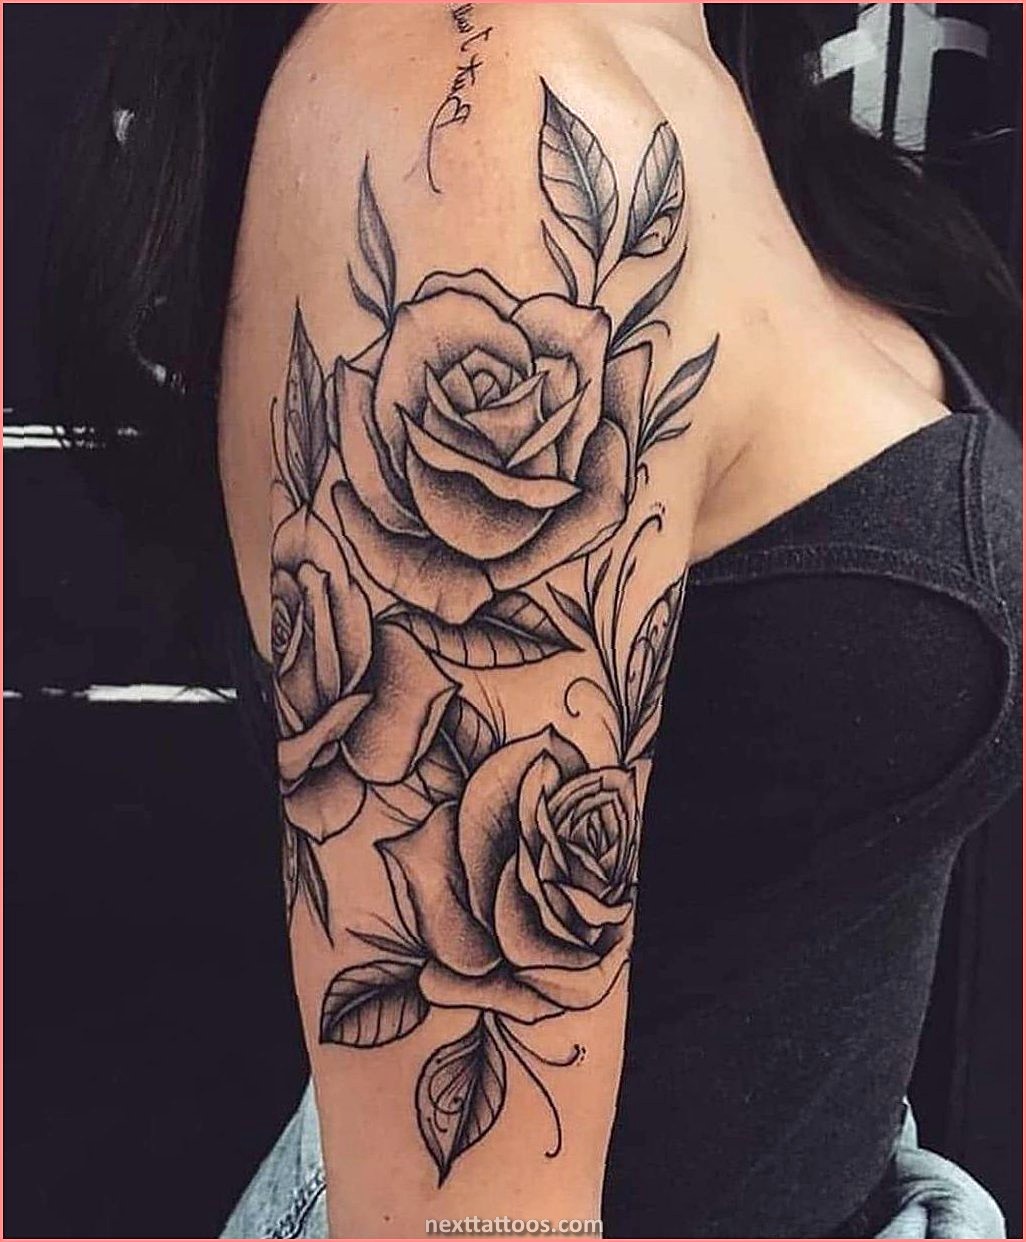 Women's Arm Tattoos - Beautiful Designs For Small Arms